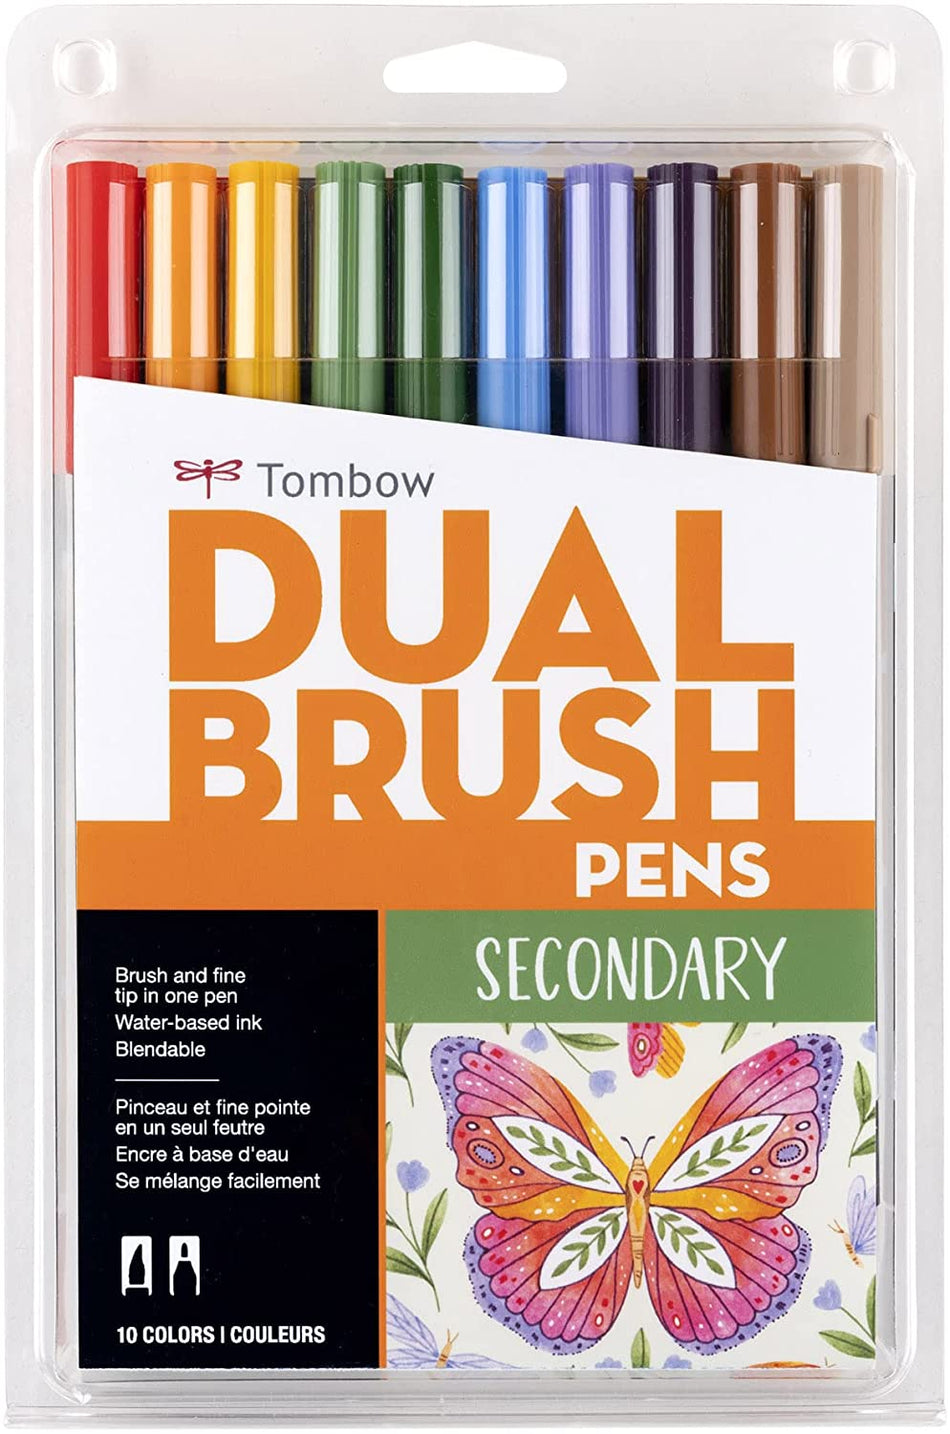 Tombow Dual Brush Pens - Secondary Colors (10 Pack)